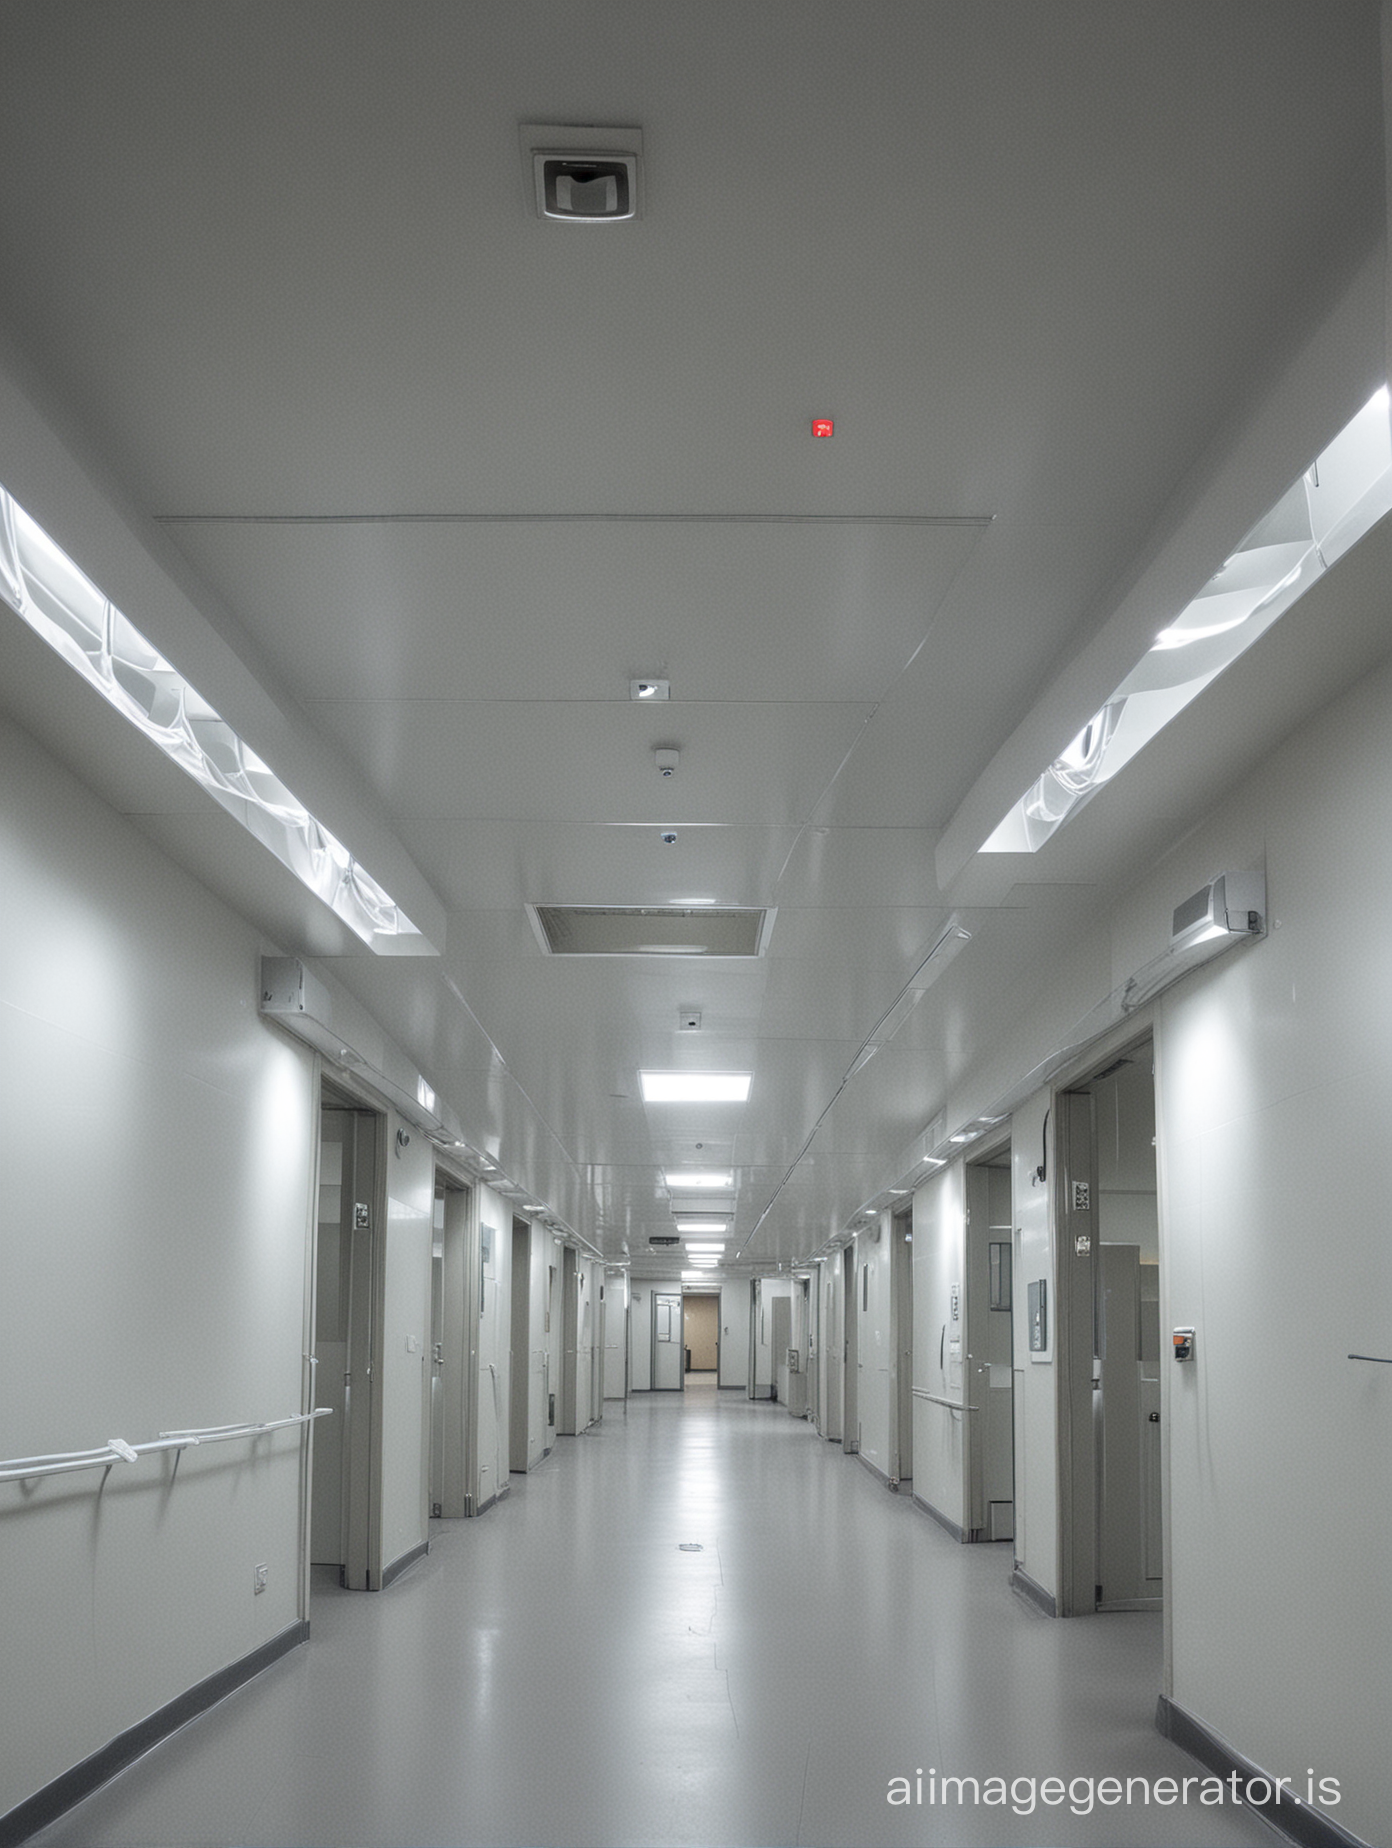 Surgical ward view of the walls and ceiling